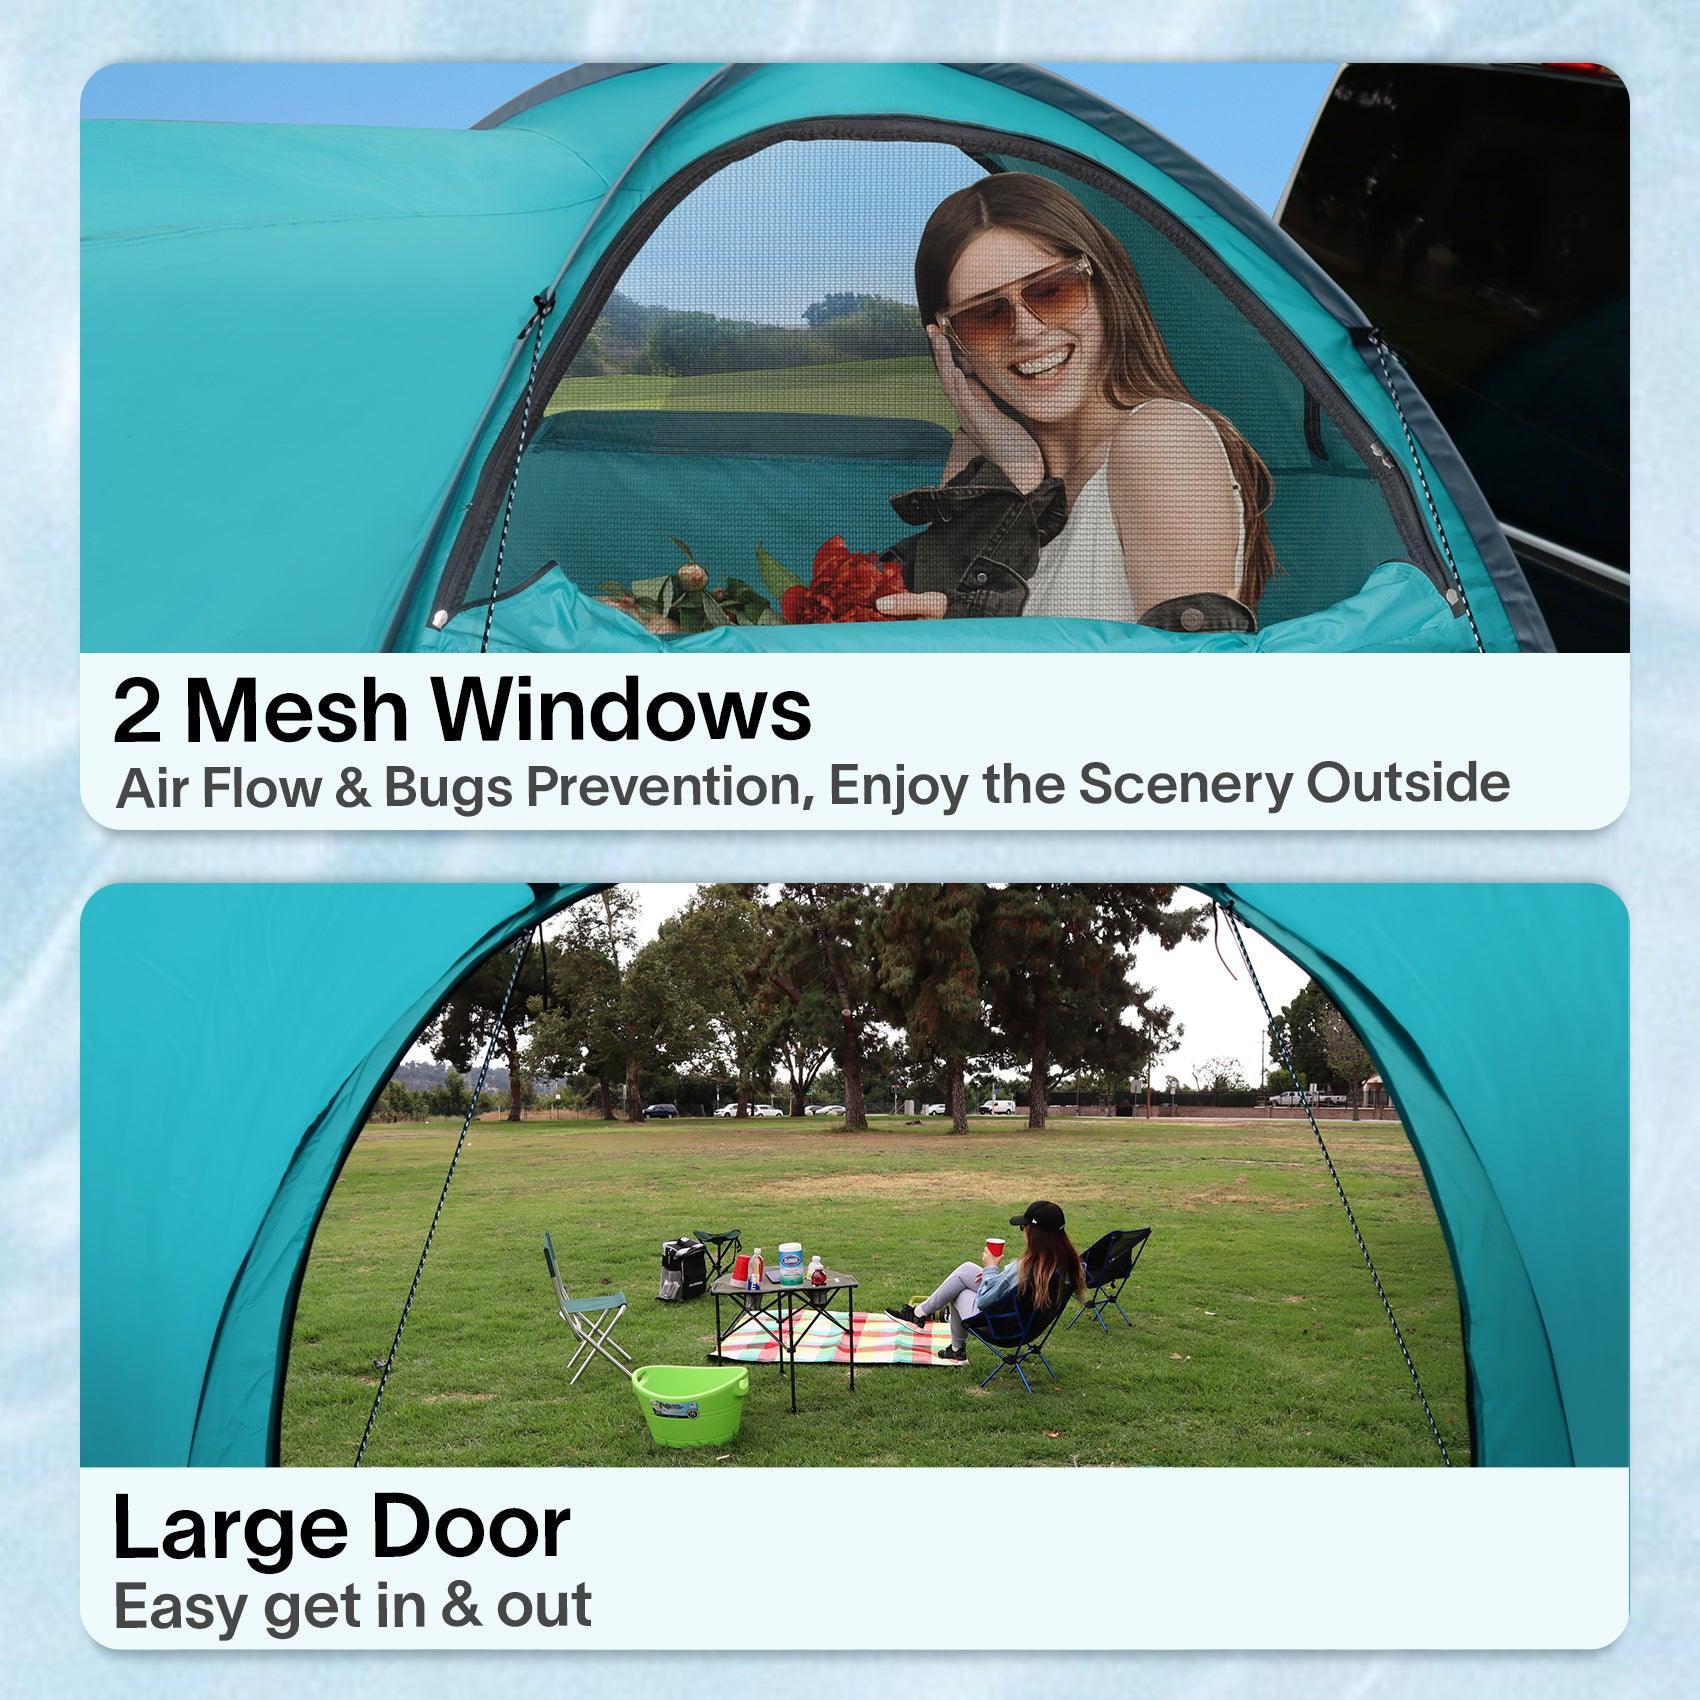 Truck Tent has two breathable mesh windows and a huge door for easy access